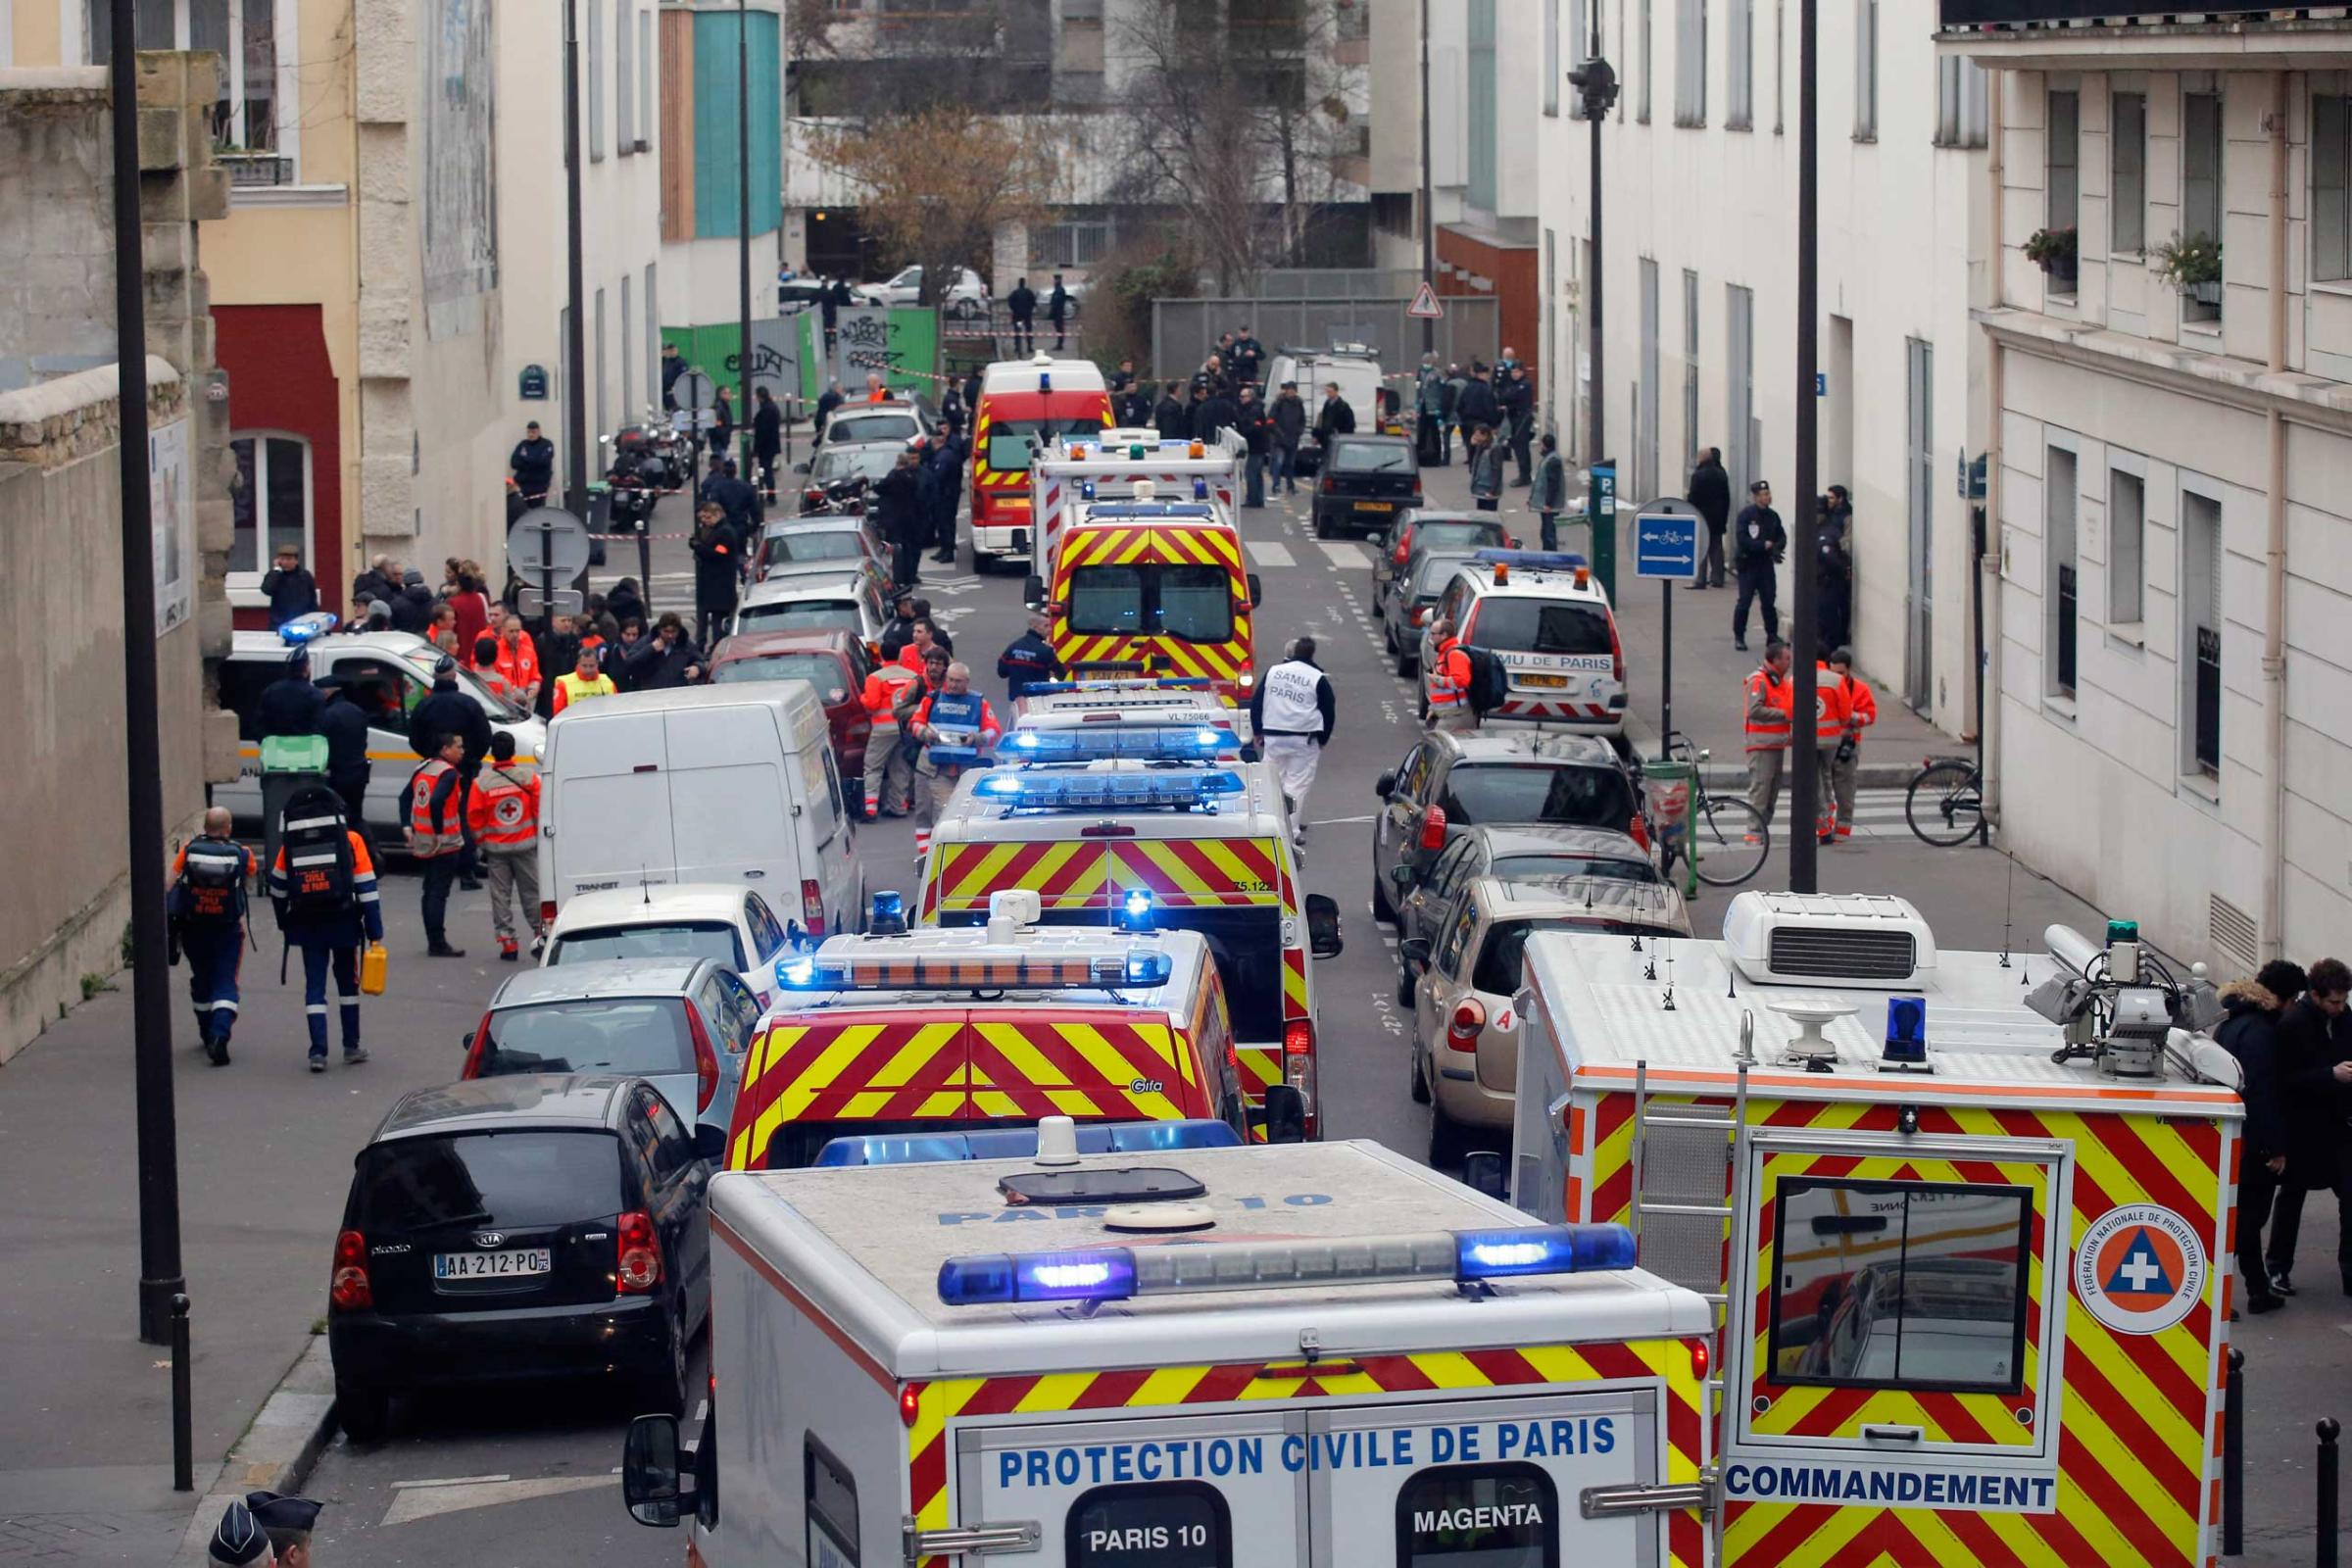 Ambulances gather in the street outside the French satirical newspaper Charlie Hebdo's office, in Paris, Jan. 7, 2015.